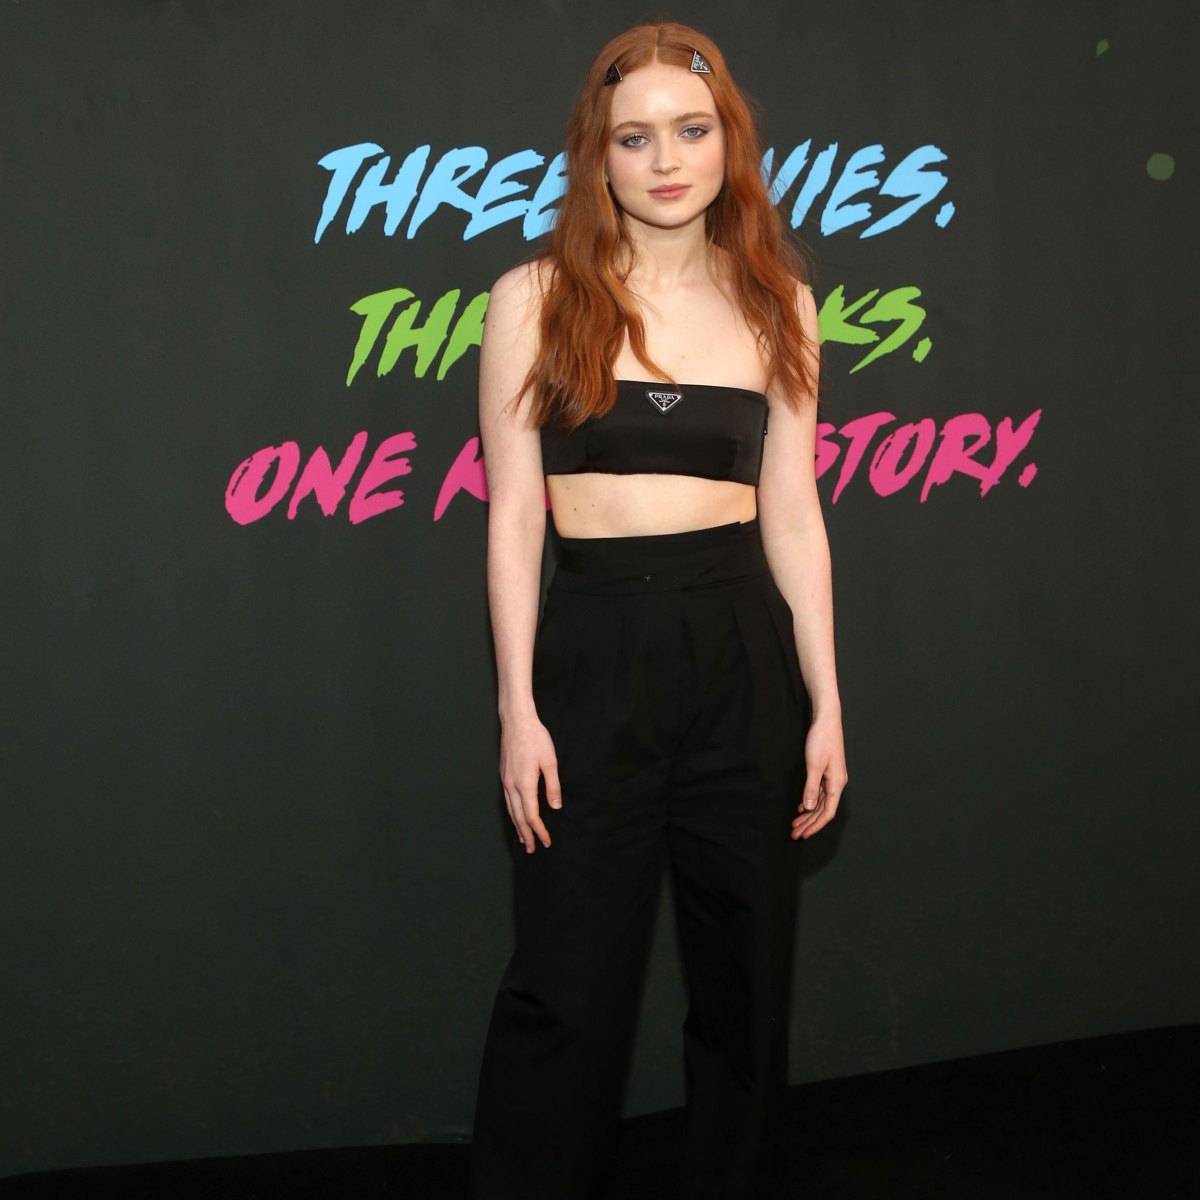 Why Stranger Things' Sadie Sink kills it on the red carpet – she embraces  Chanel, Gucci, Prada and looks stunning in a blazer